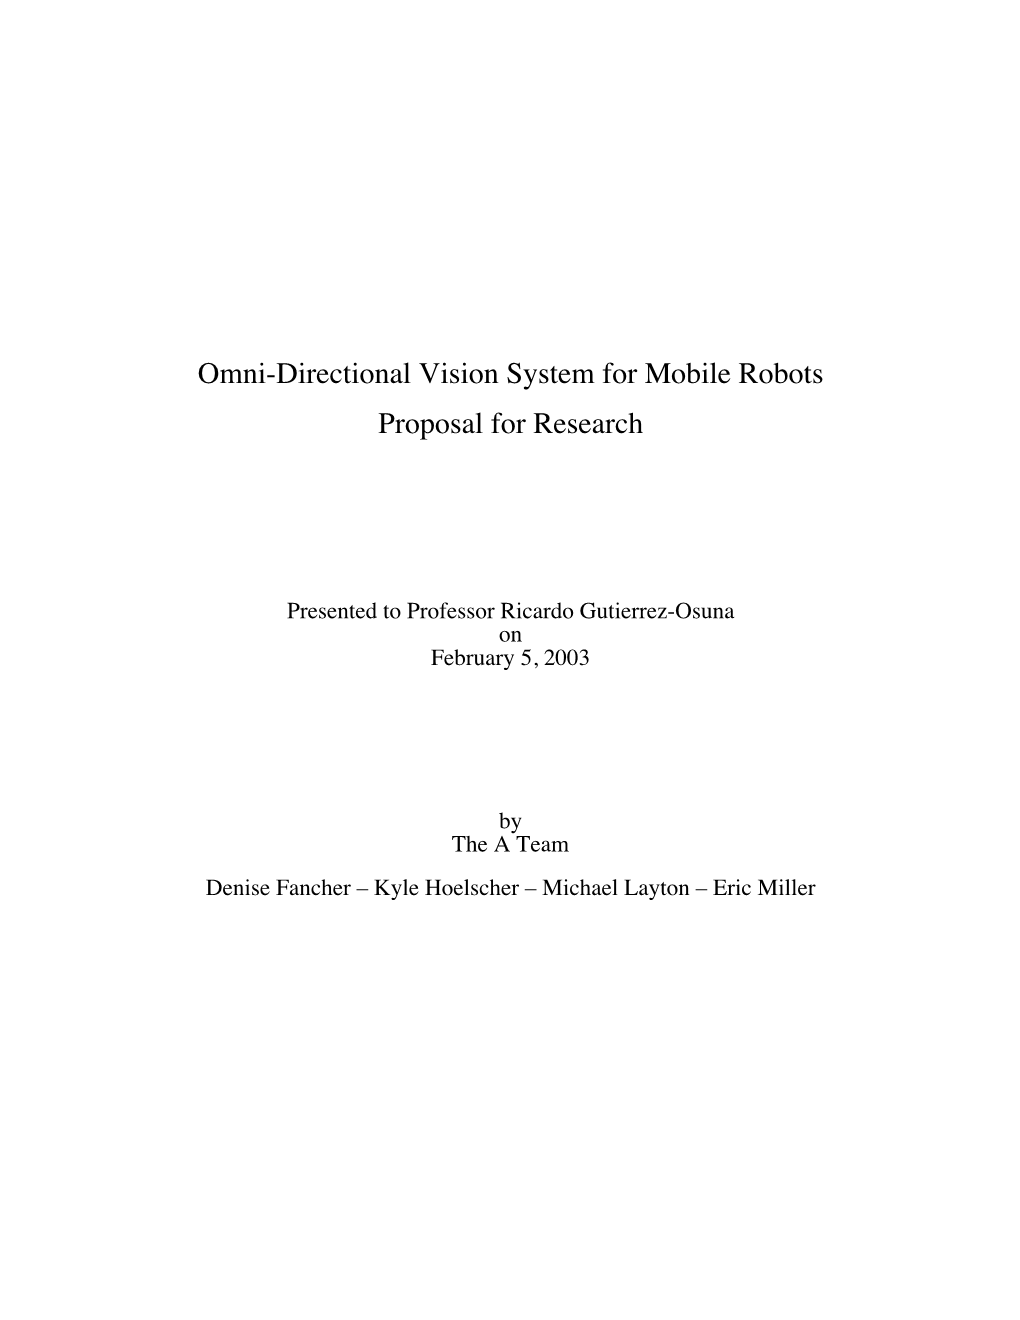 Omni-Directional Vision System for Mobile Robots Proposal for Research